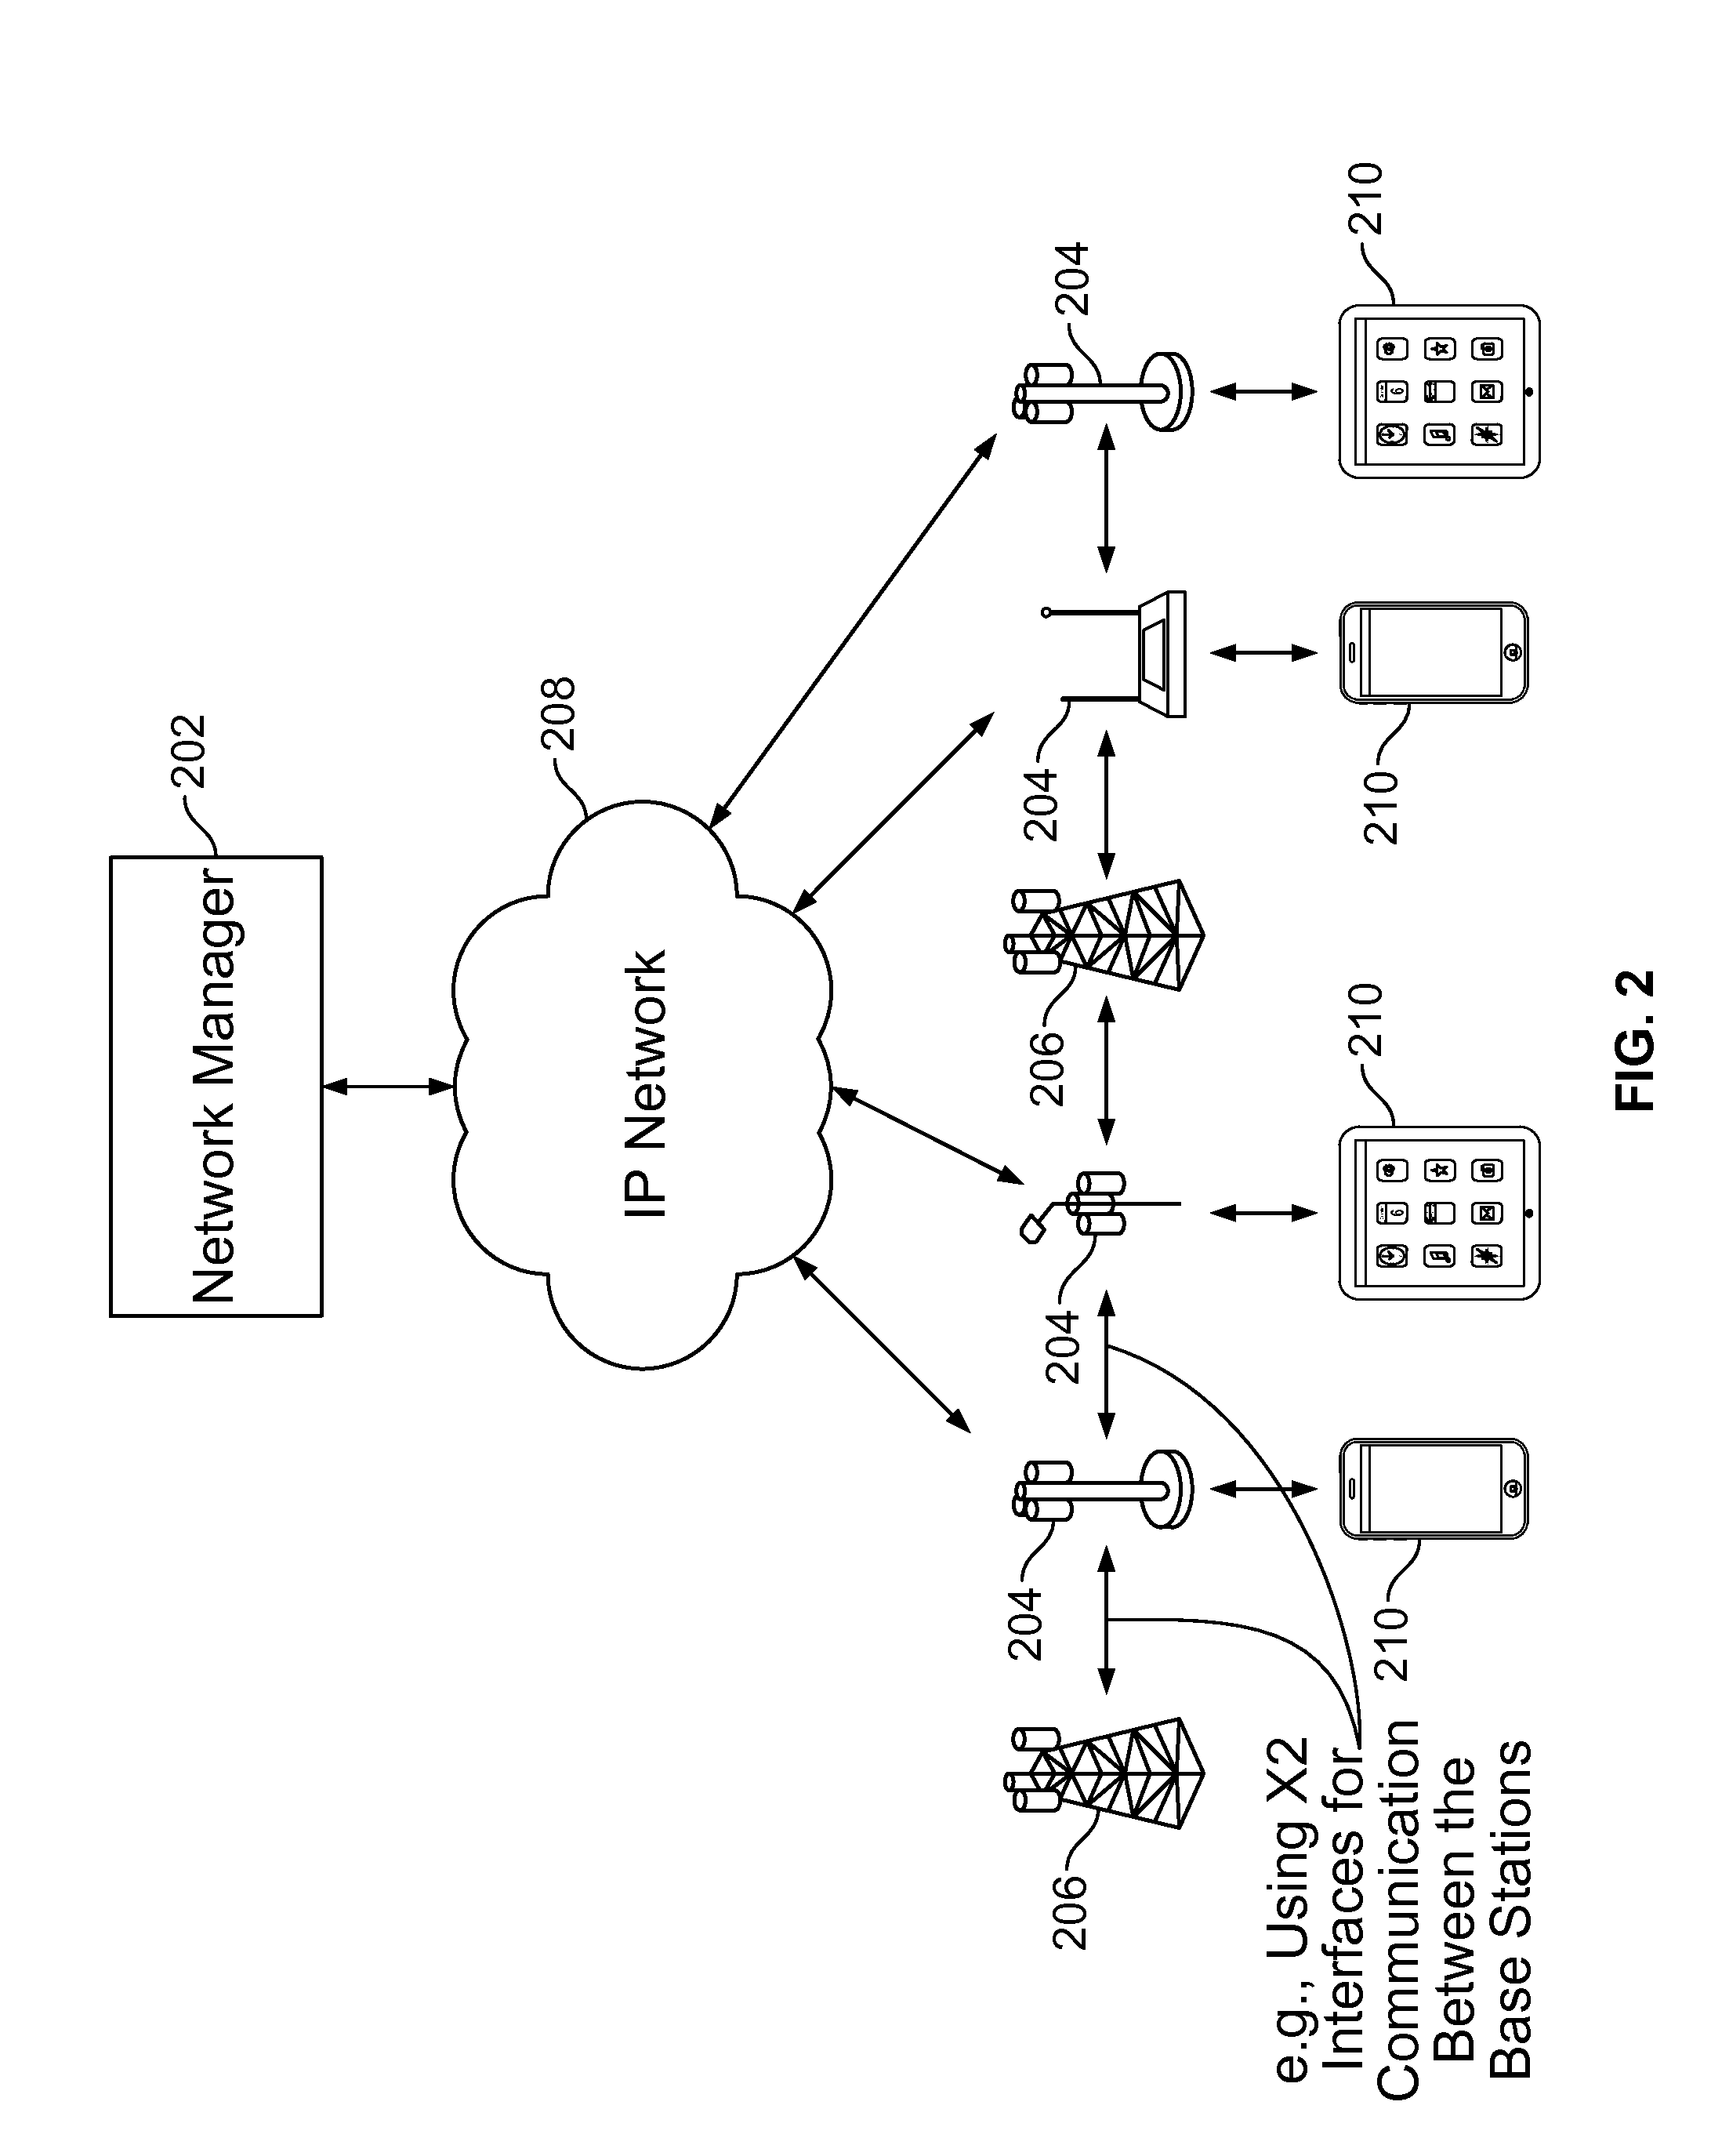 Interference management and network performance optimization in small cells